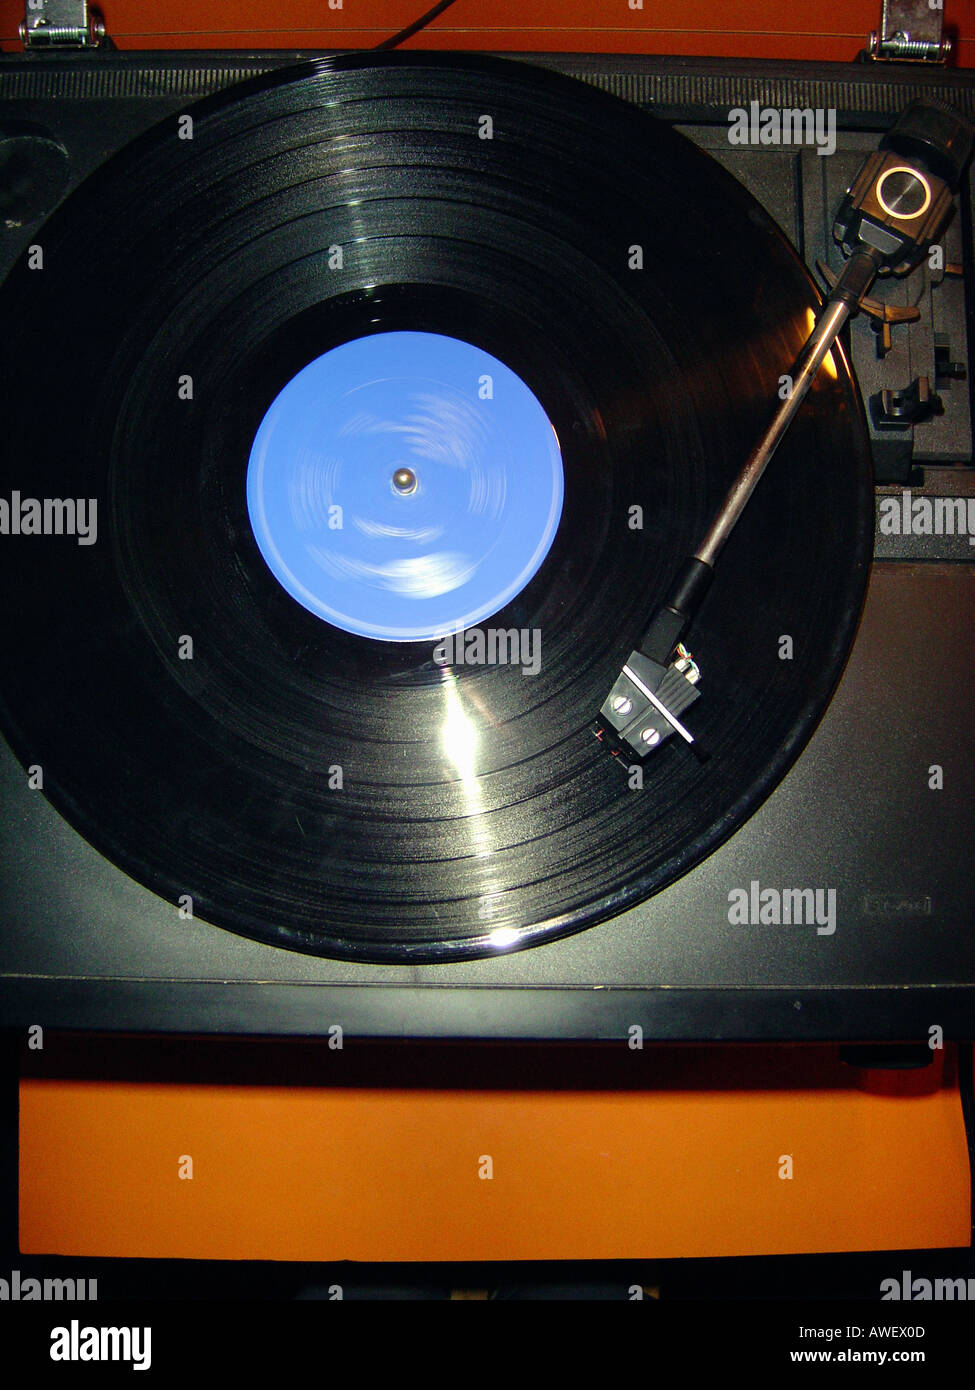 Vinyl LP Record Spinning and Playing on a Turntable Record Player Viewed From Above Copy Space Stock Photo